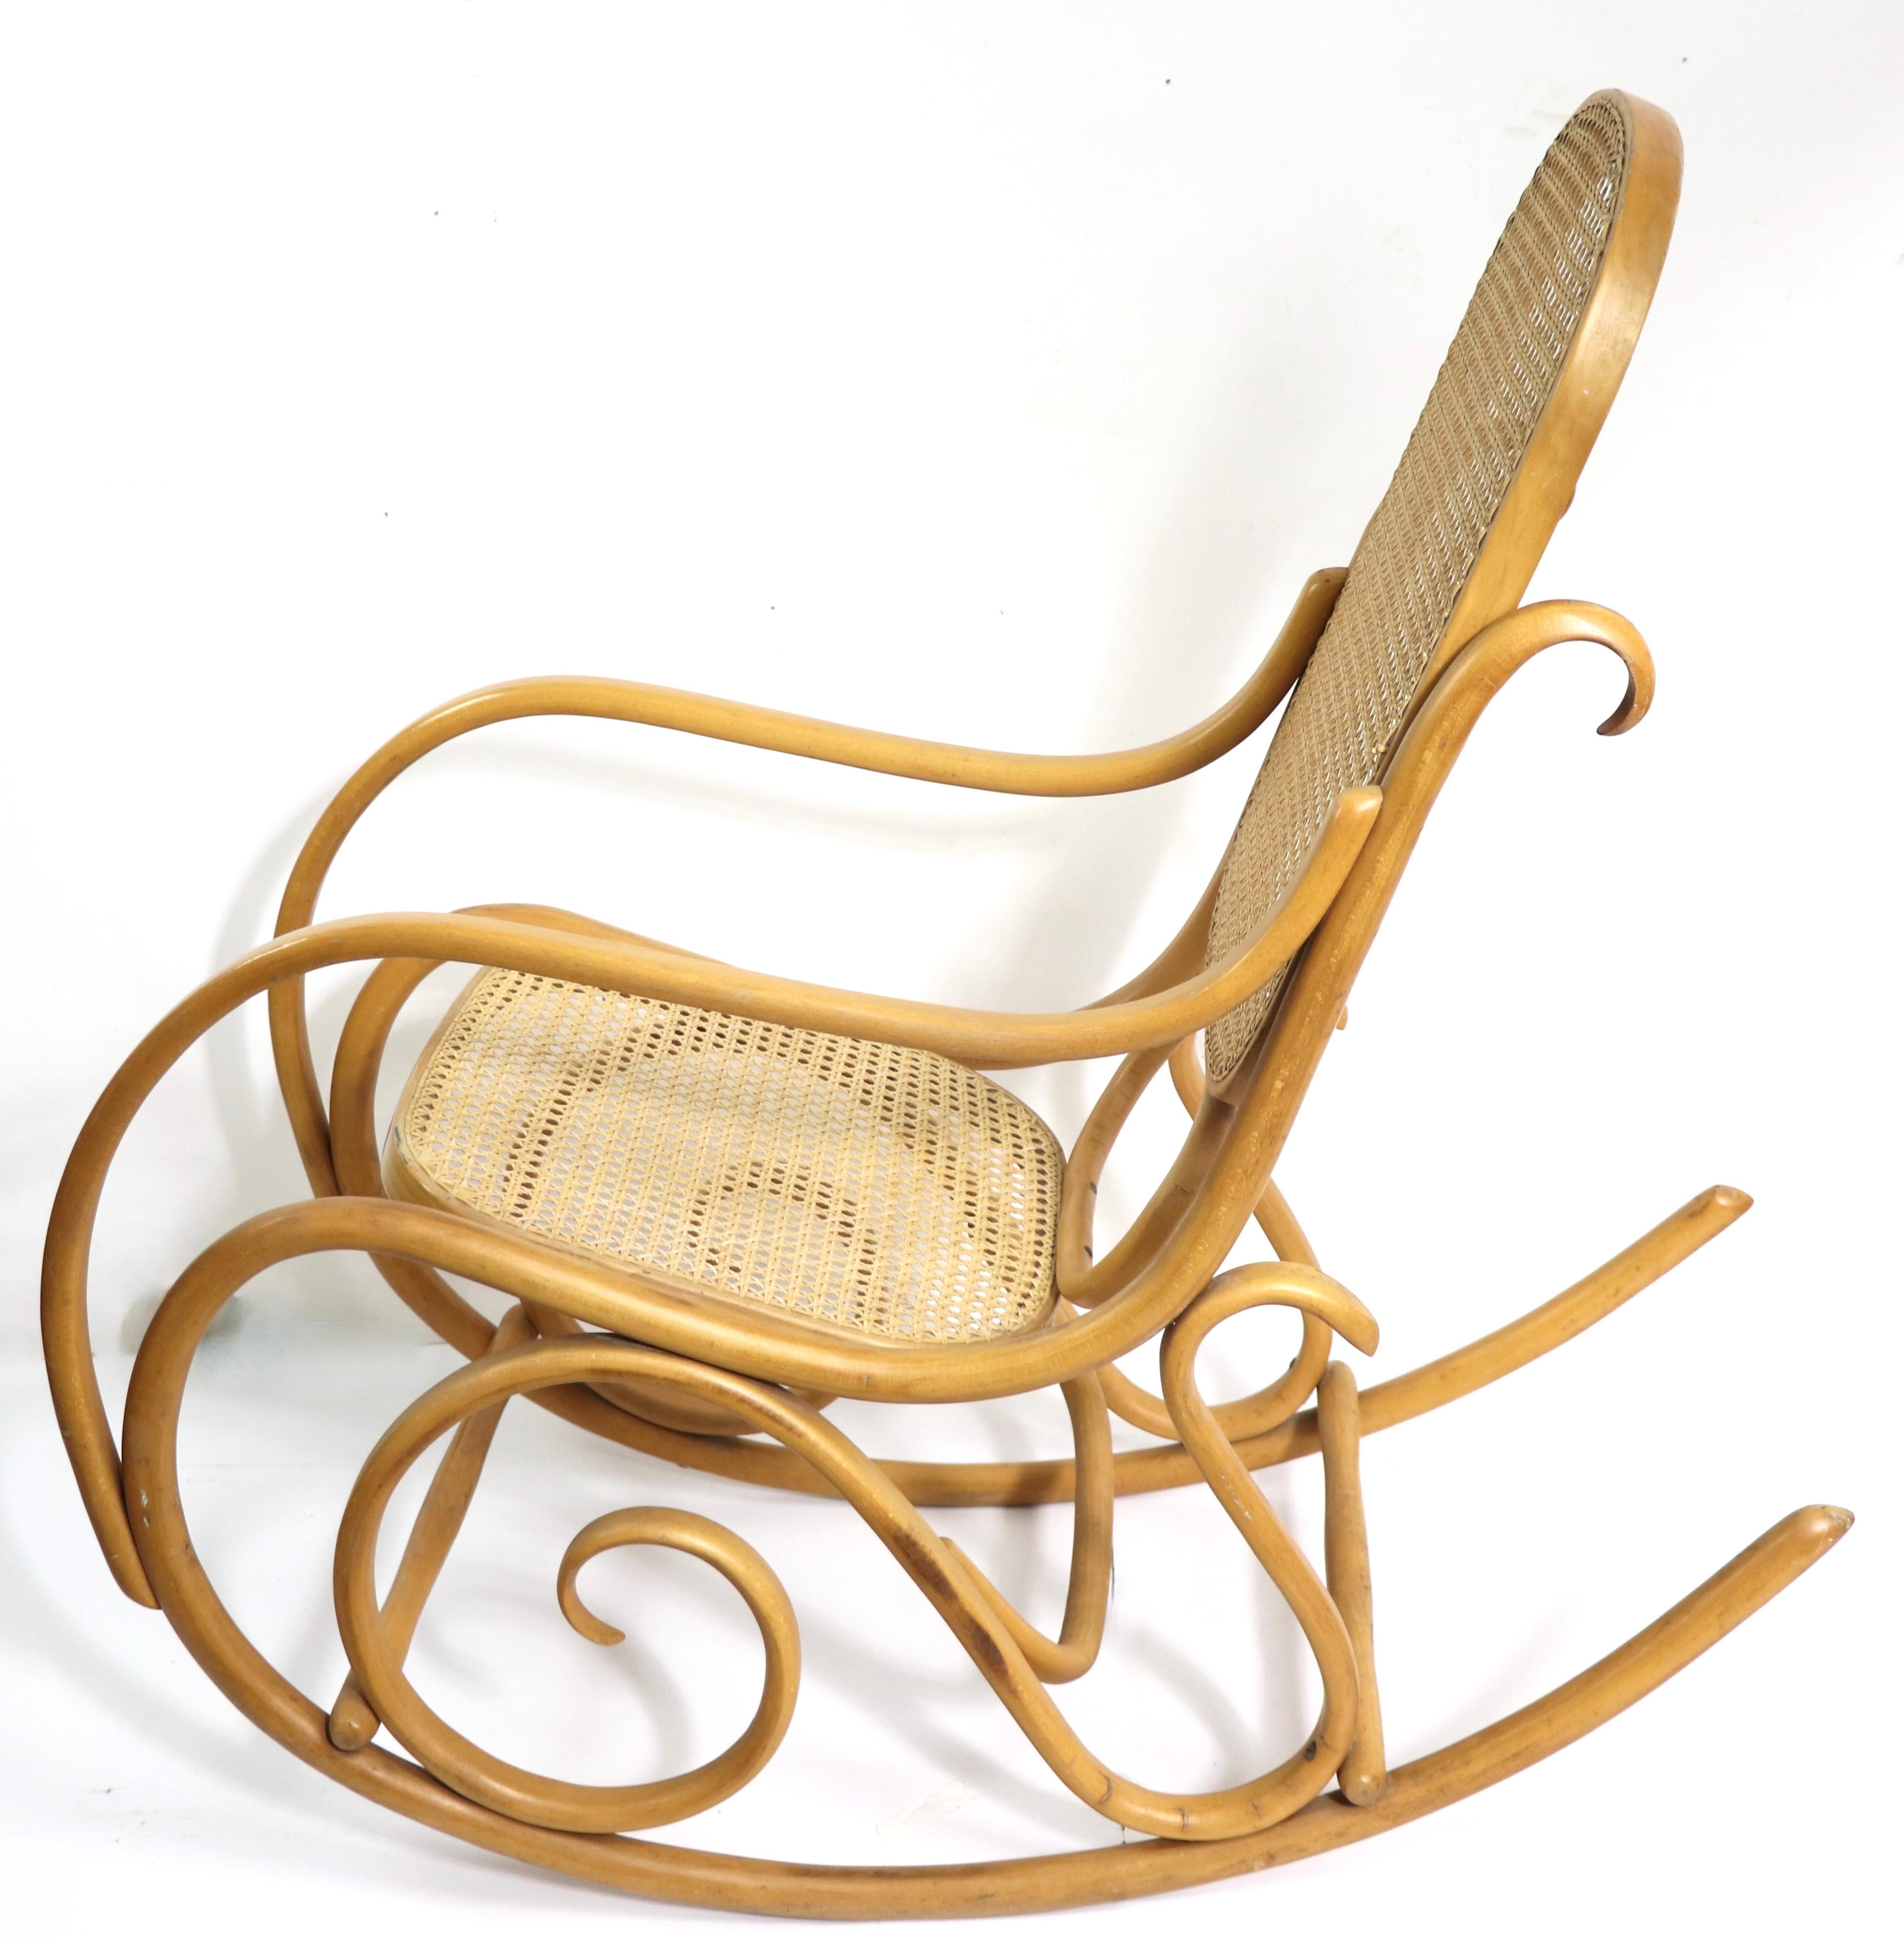 Nice vintage bentwood rocking chair, in the style of the Vienna Secession movement, probably 20th C, - made in USA by Thonet, unsigned. This example is in very clean original , clean and ready to use condition. 
 Measures: Total H 40 x Arm H 26 x